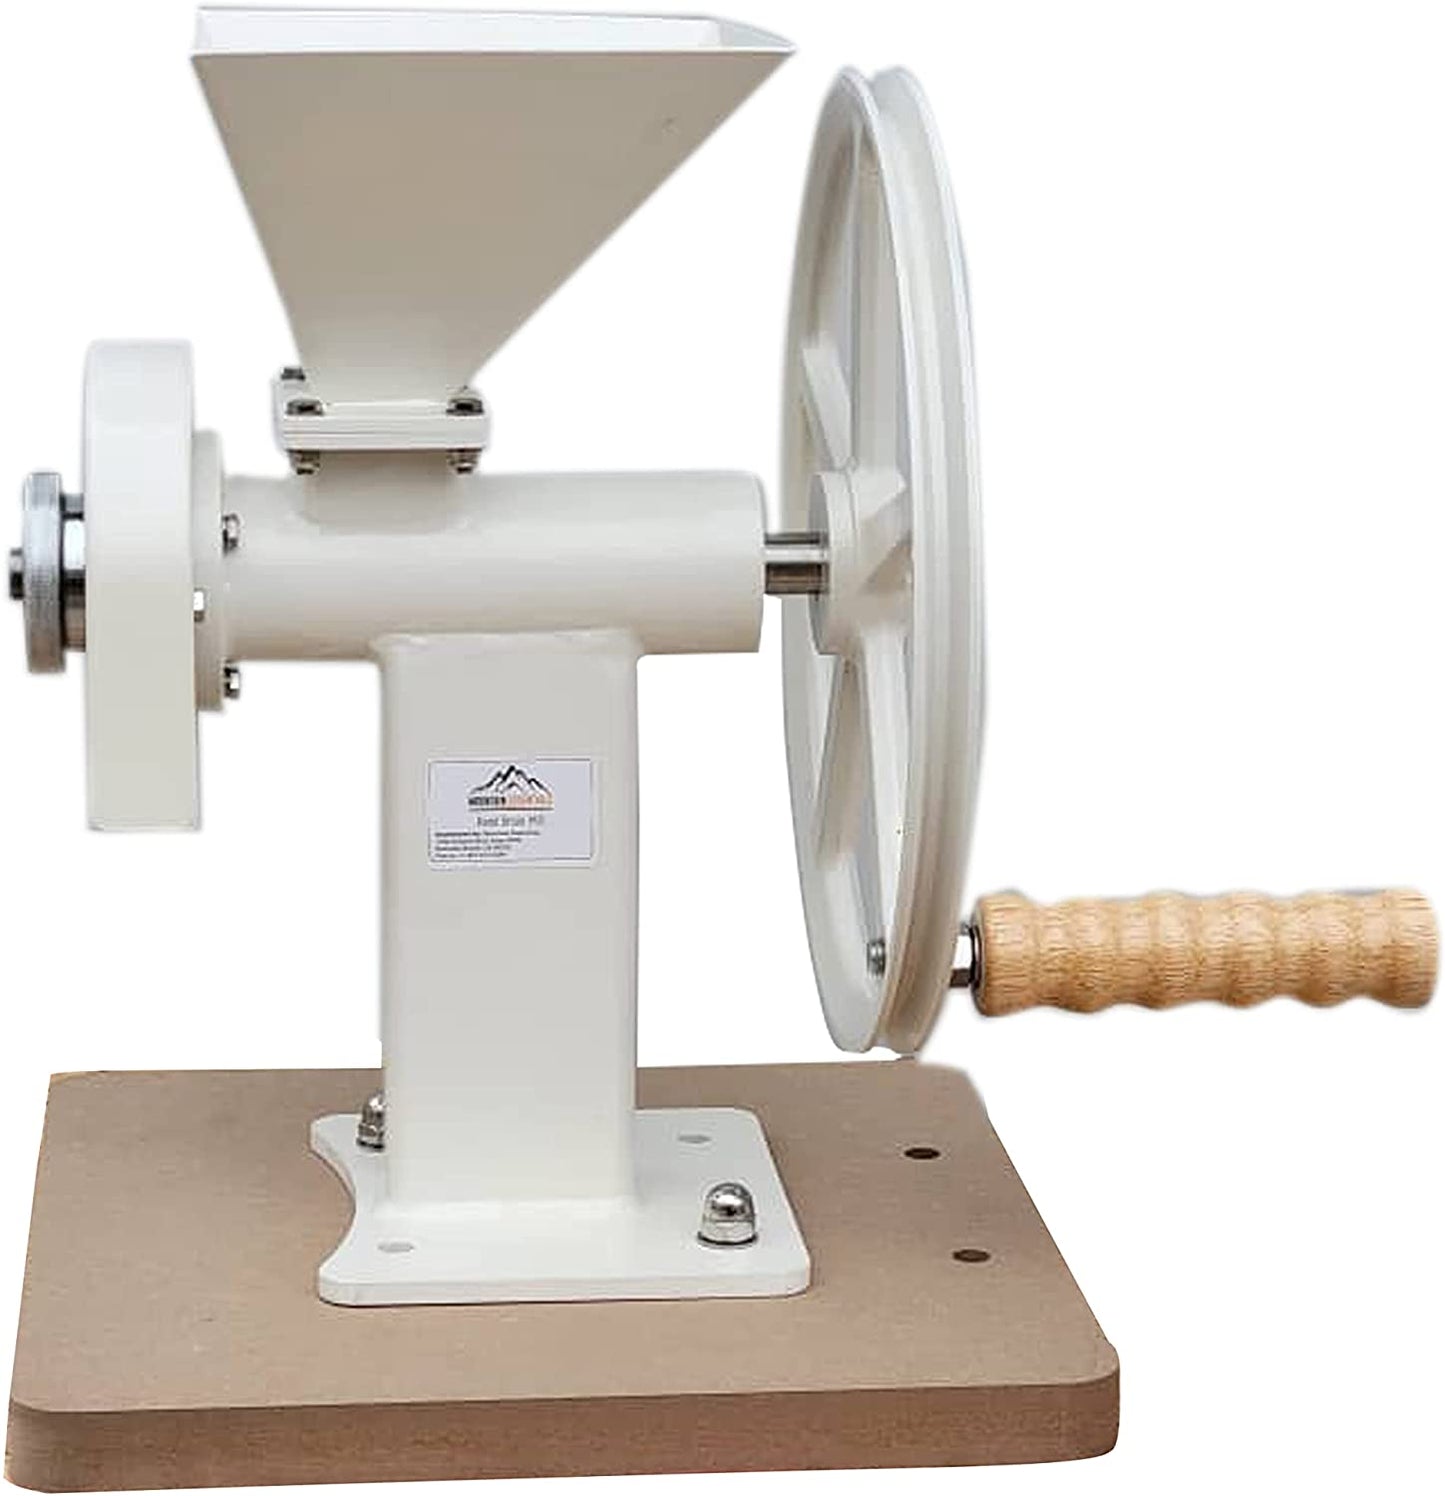 Manual Grain Mill Grinder Hand Crank For Grinding Corn Nut Spice Wheat  Coffee US